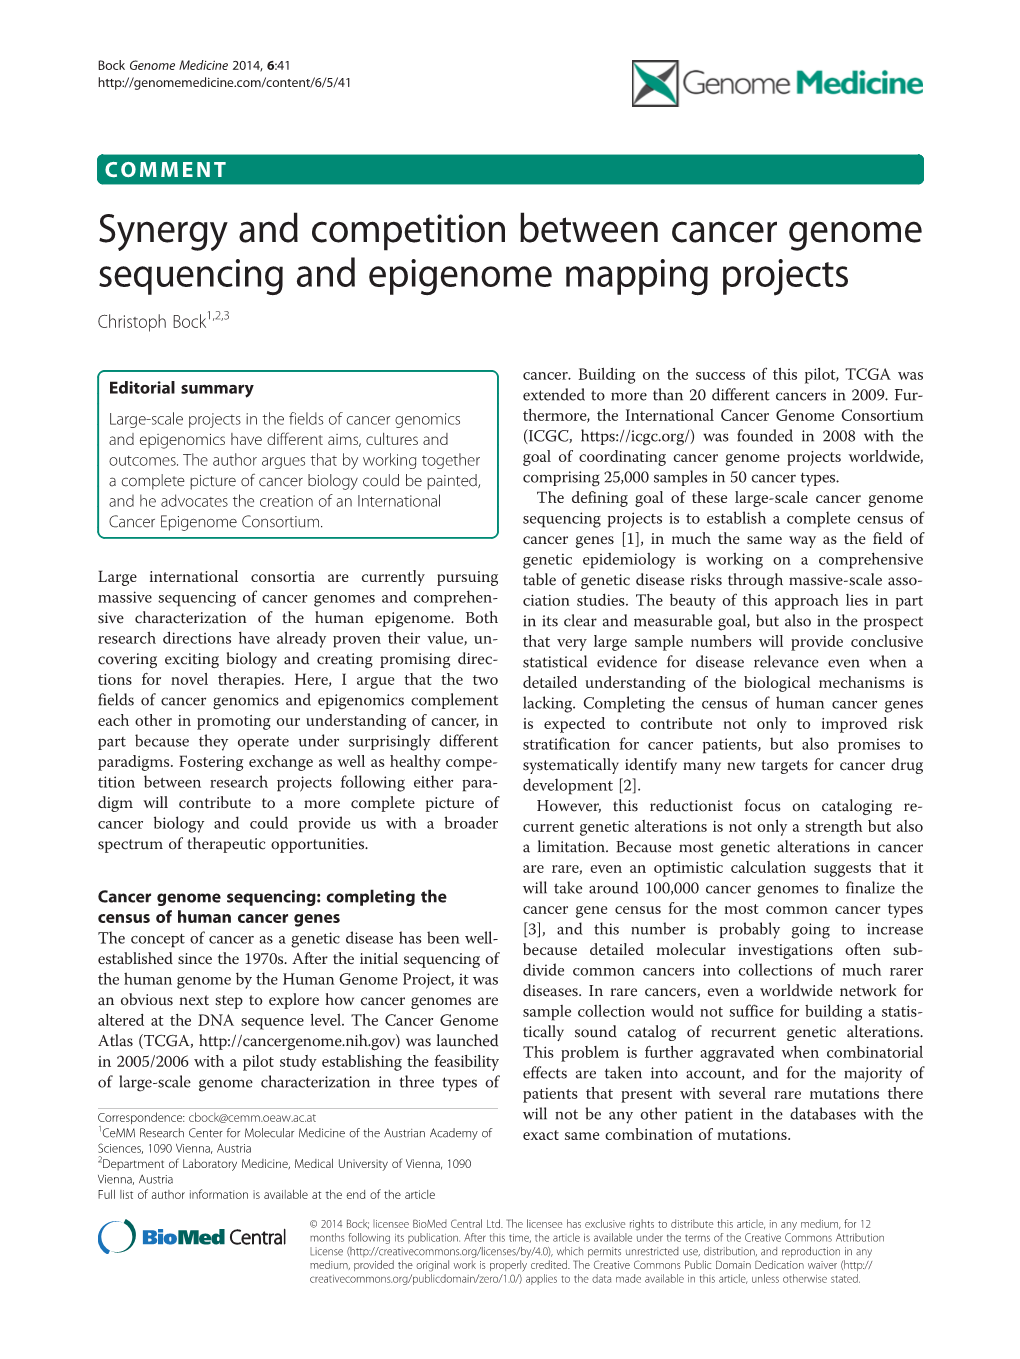 Synergy and Competition Between Cancer Genome Sequencing and Epigenome Mapping Projects Christoph Bock1,2,3